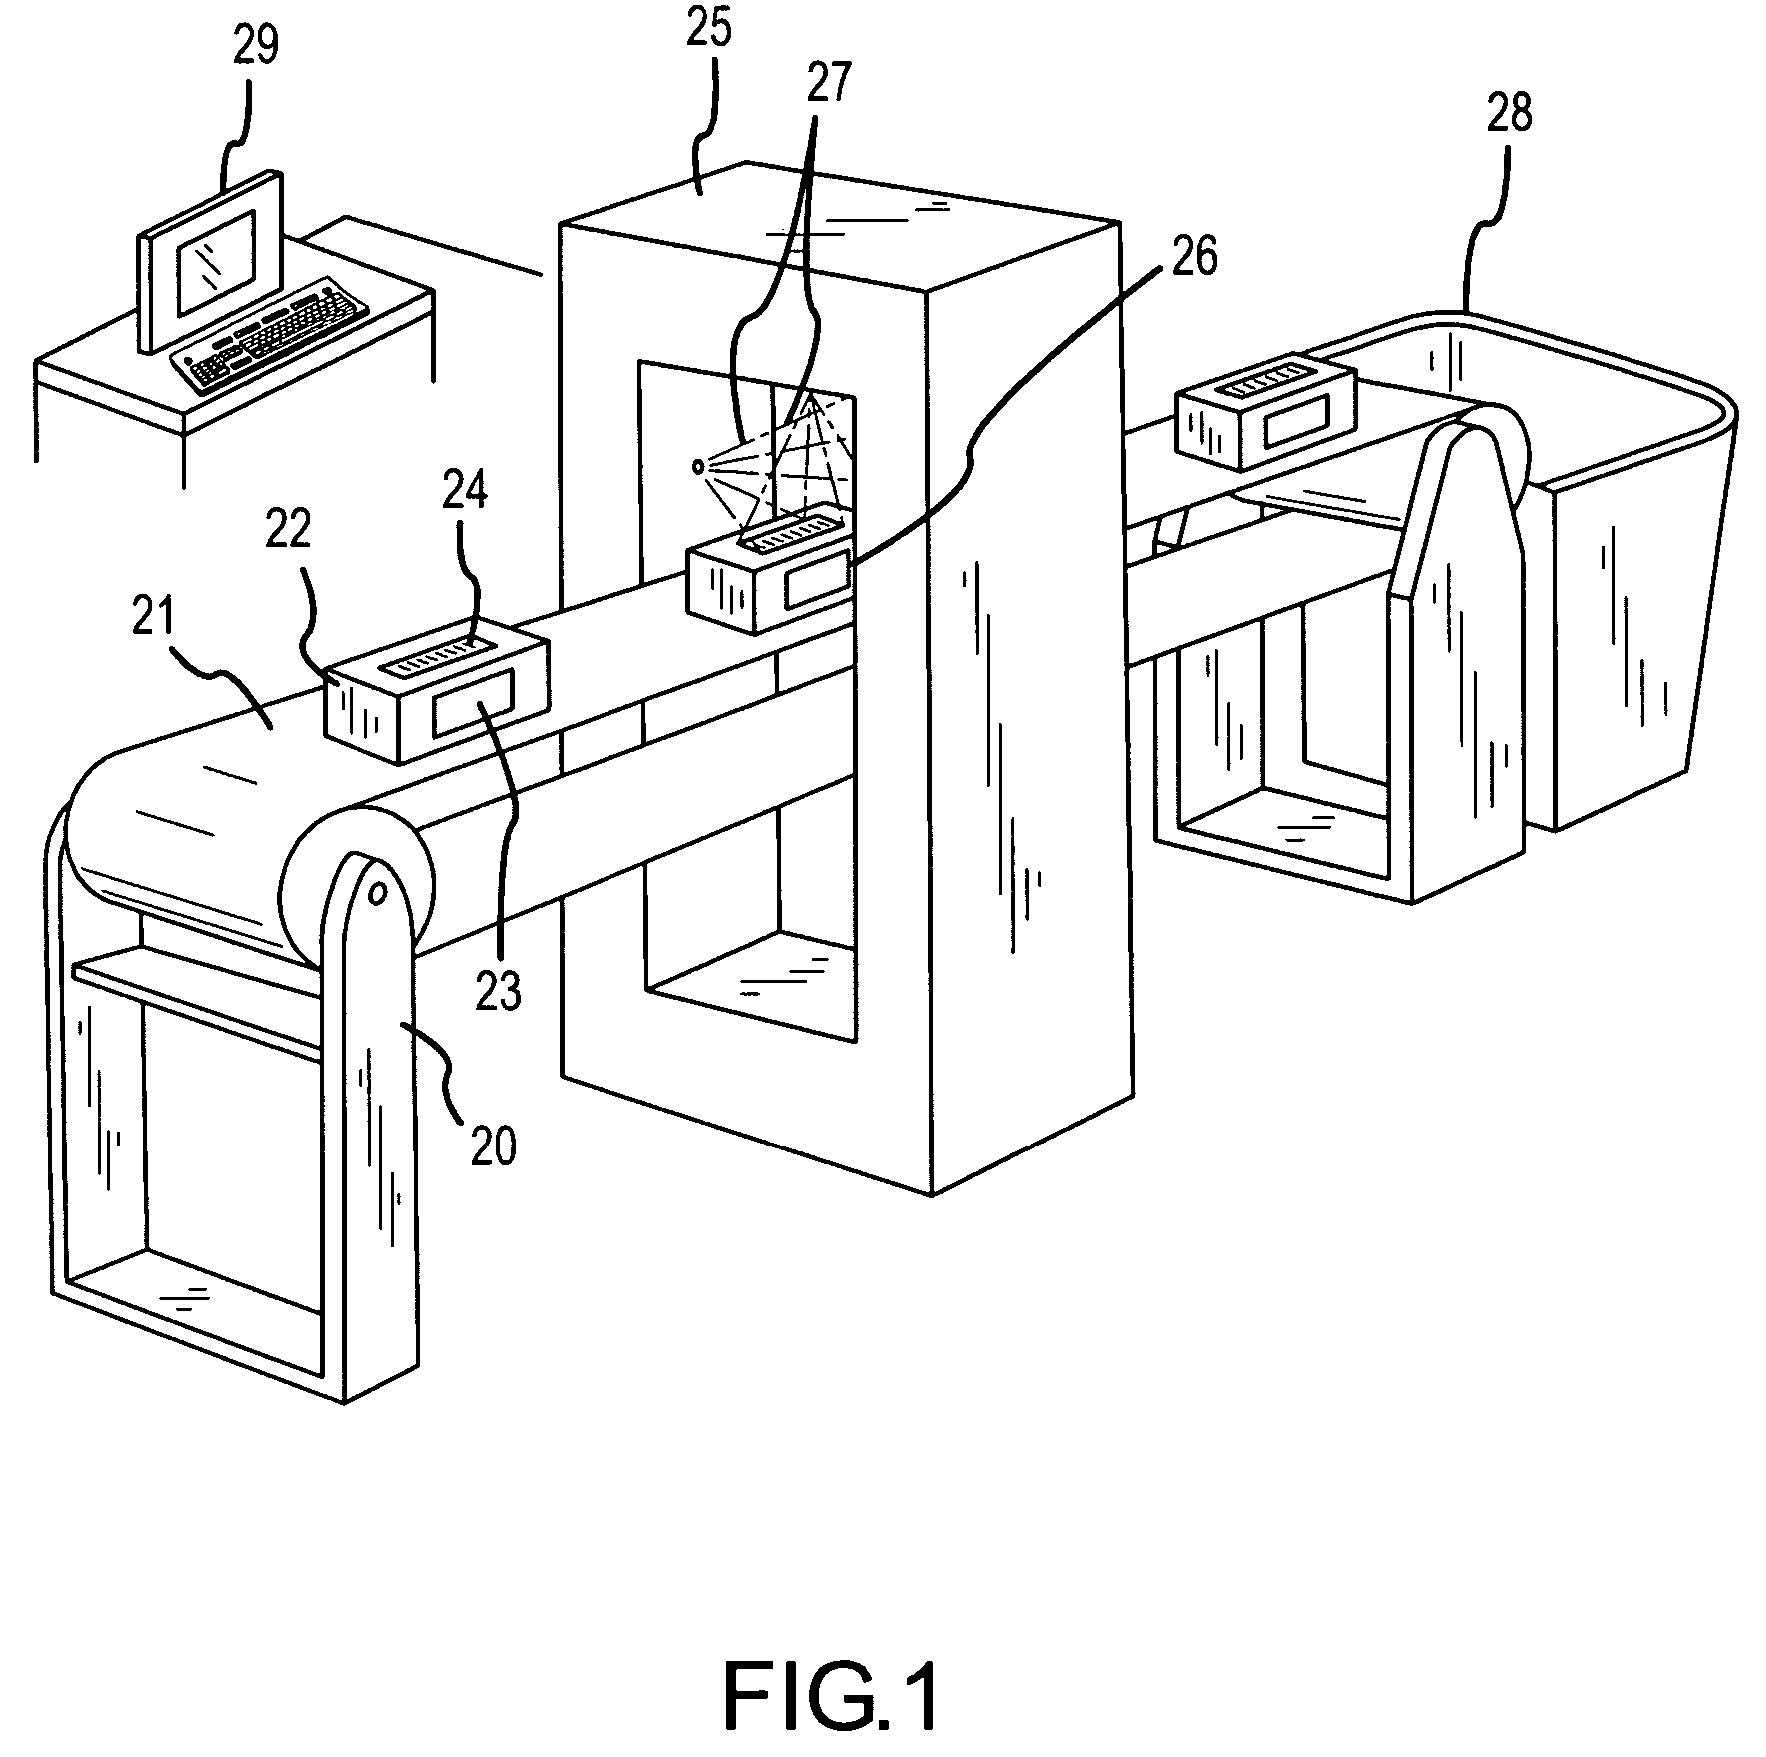 Method and apparatus for preparing an item with an RFID tag